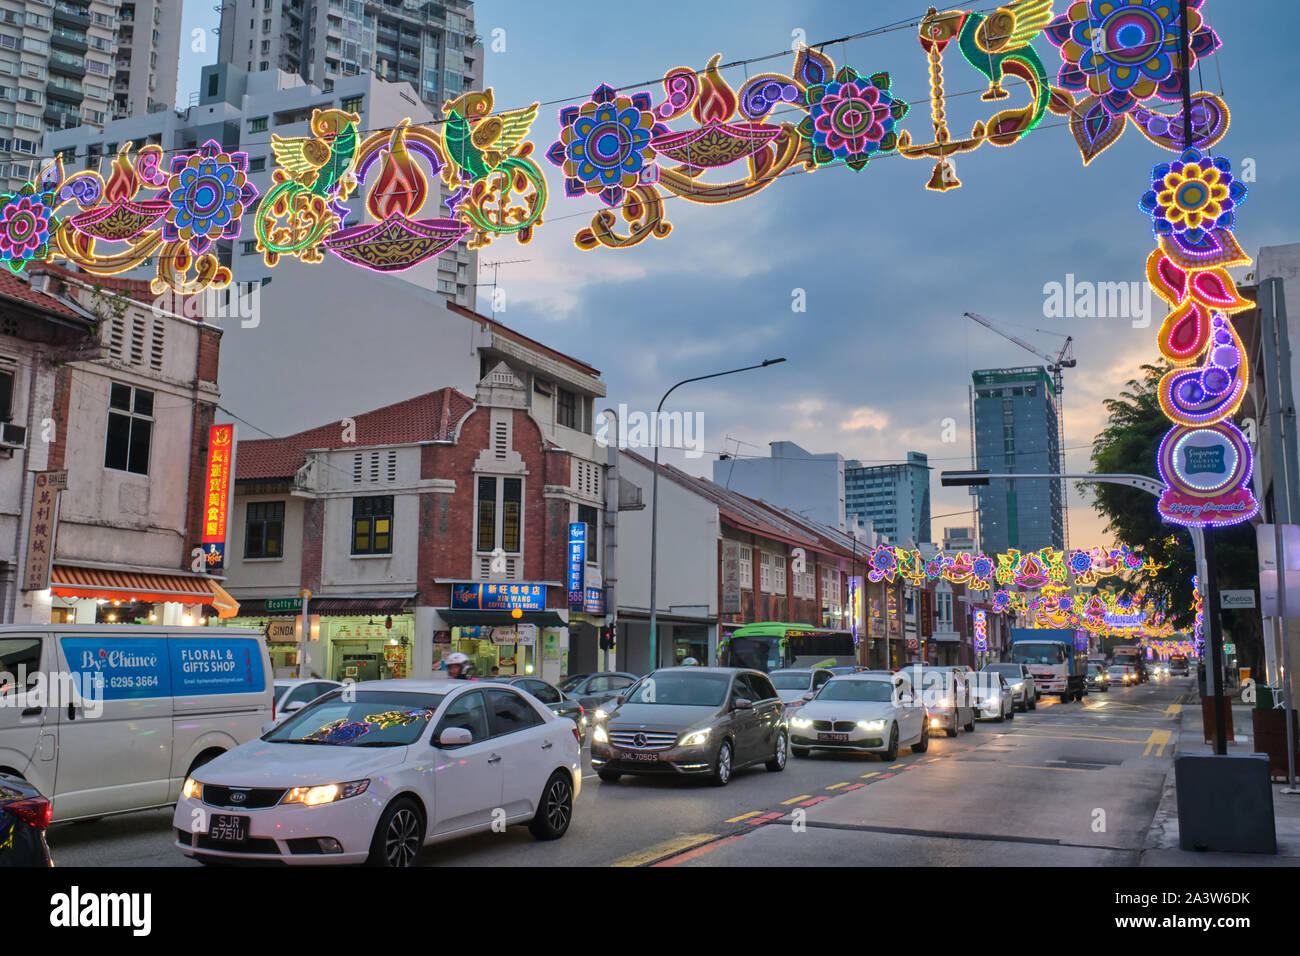 Serangoon Rd., Singapore, at the fringe of Little India district, decked out for Deepavali (Diwali) festival, celebrated by the local Hindu community Stock Photo